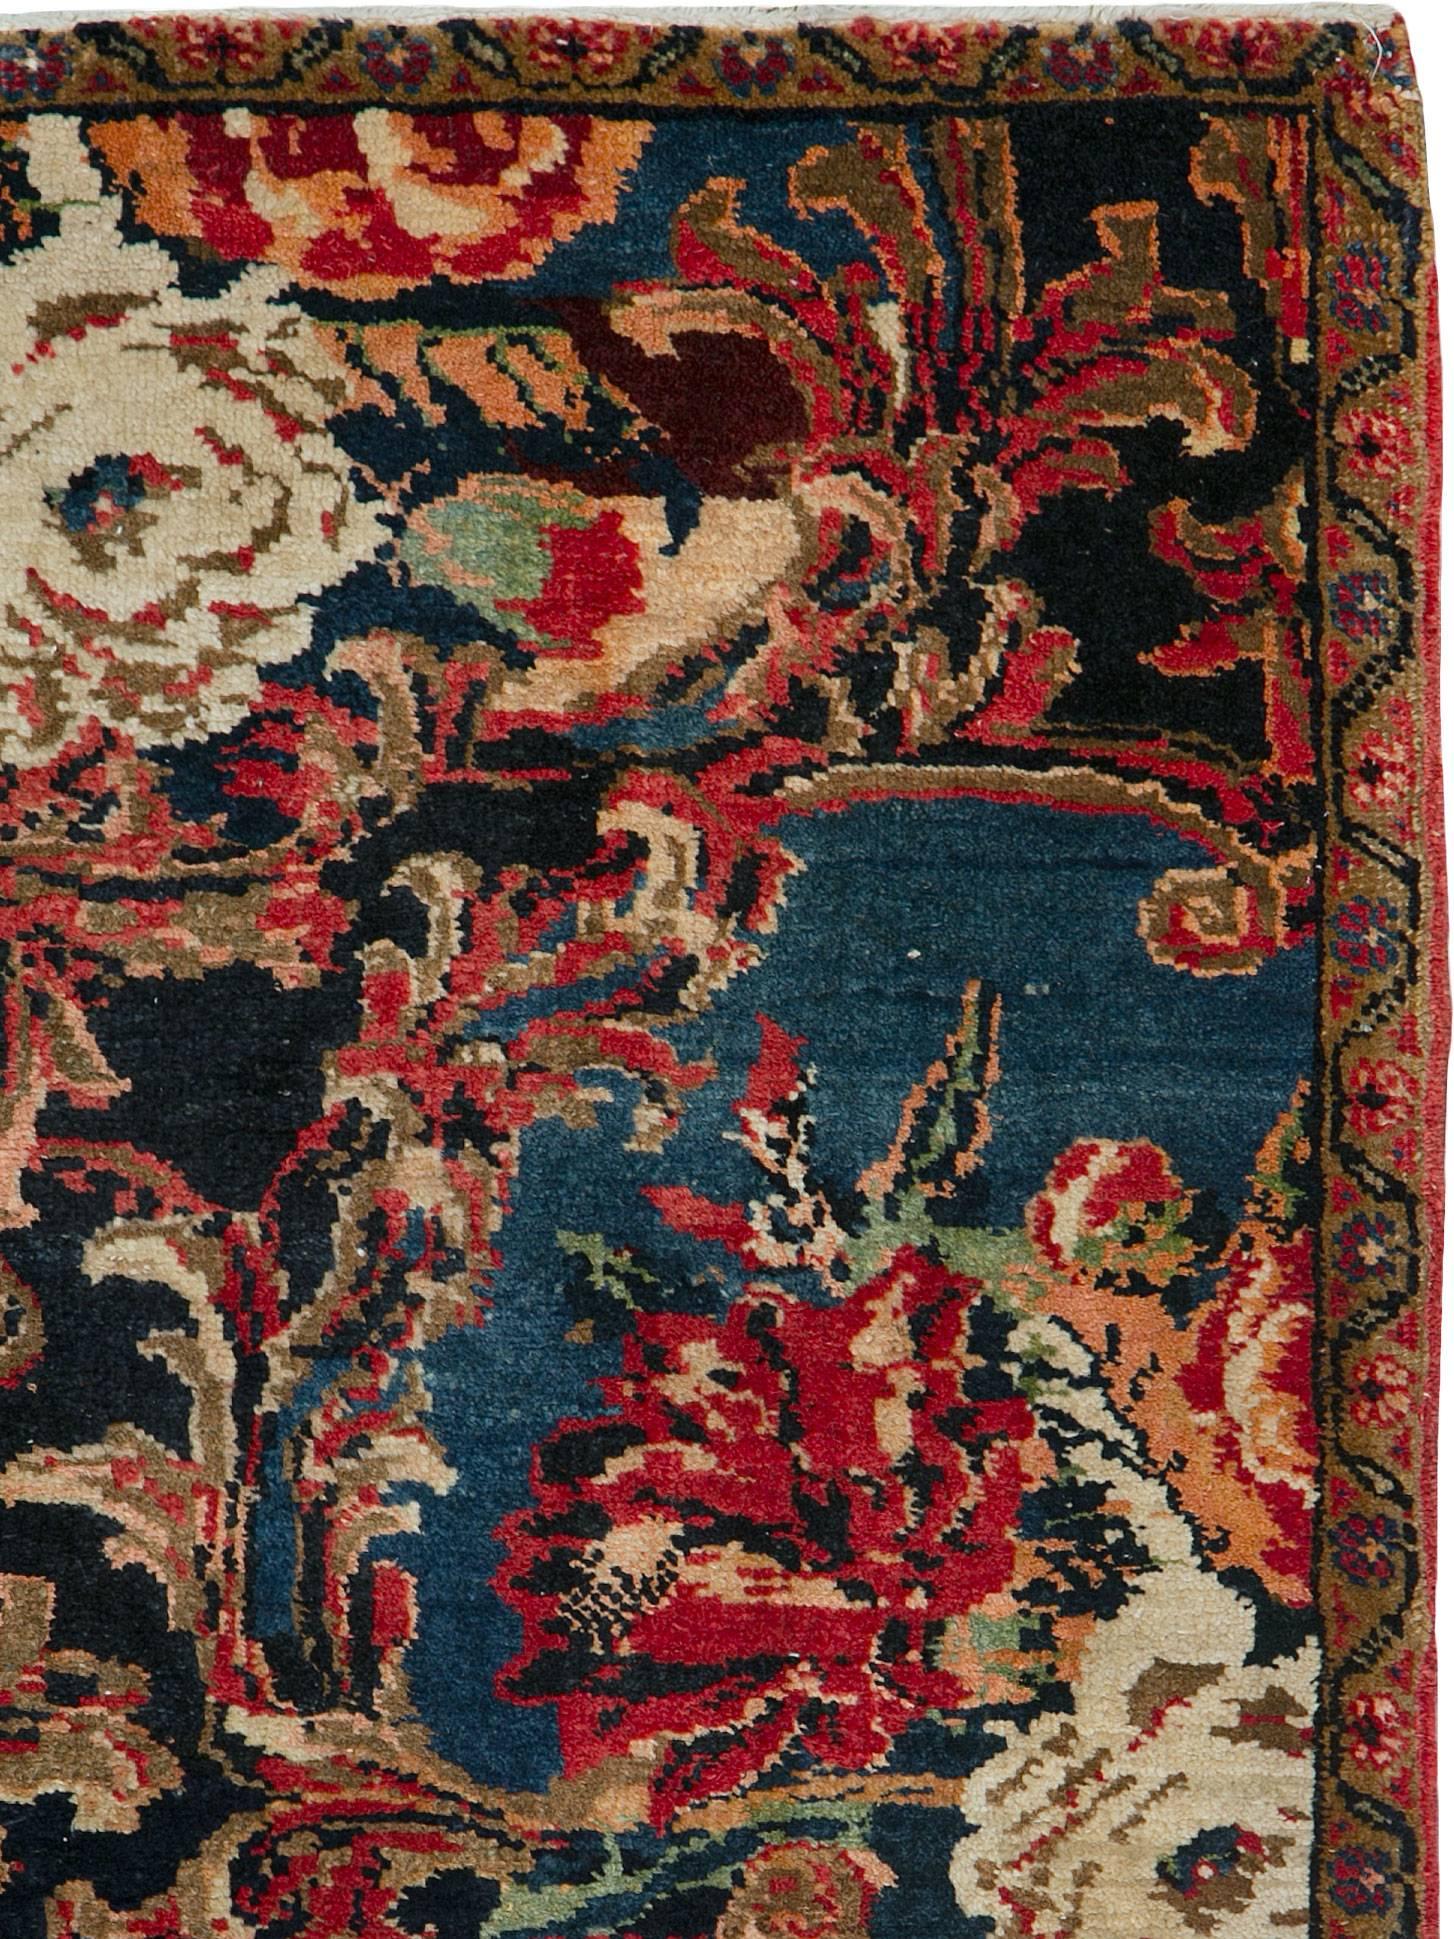 An antique Persian Bidjar carpet from the second quarter of the 20th century with a Gol Farang design which translates to 